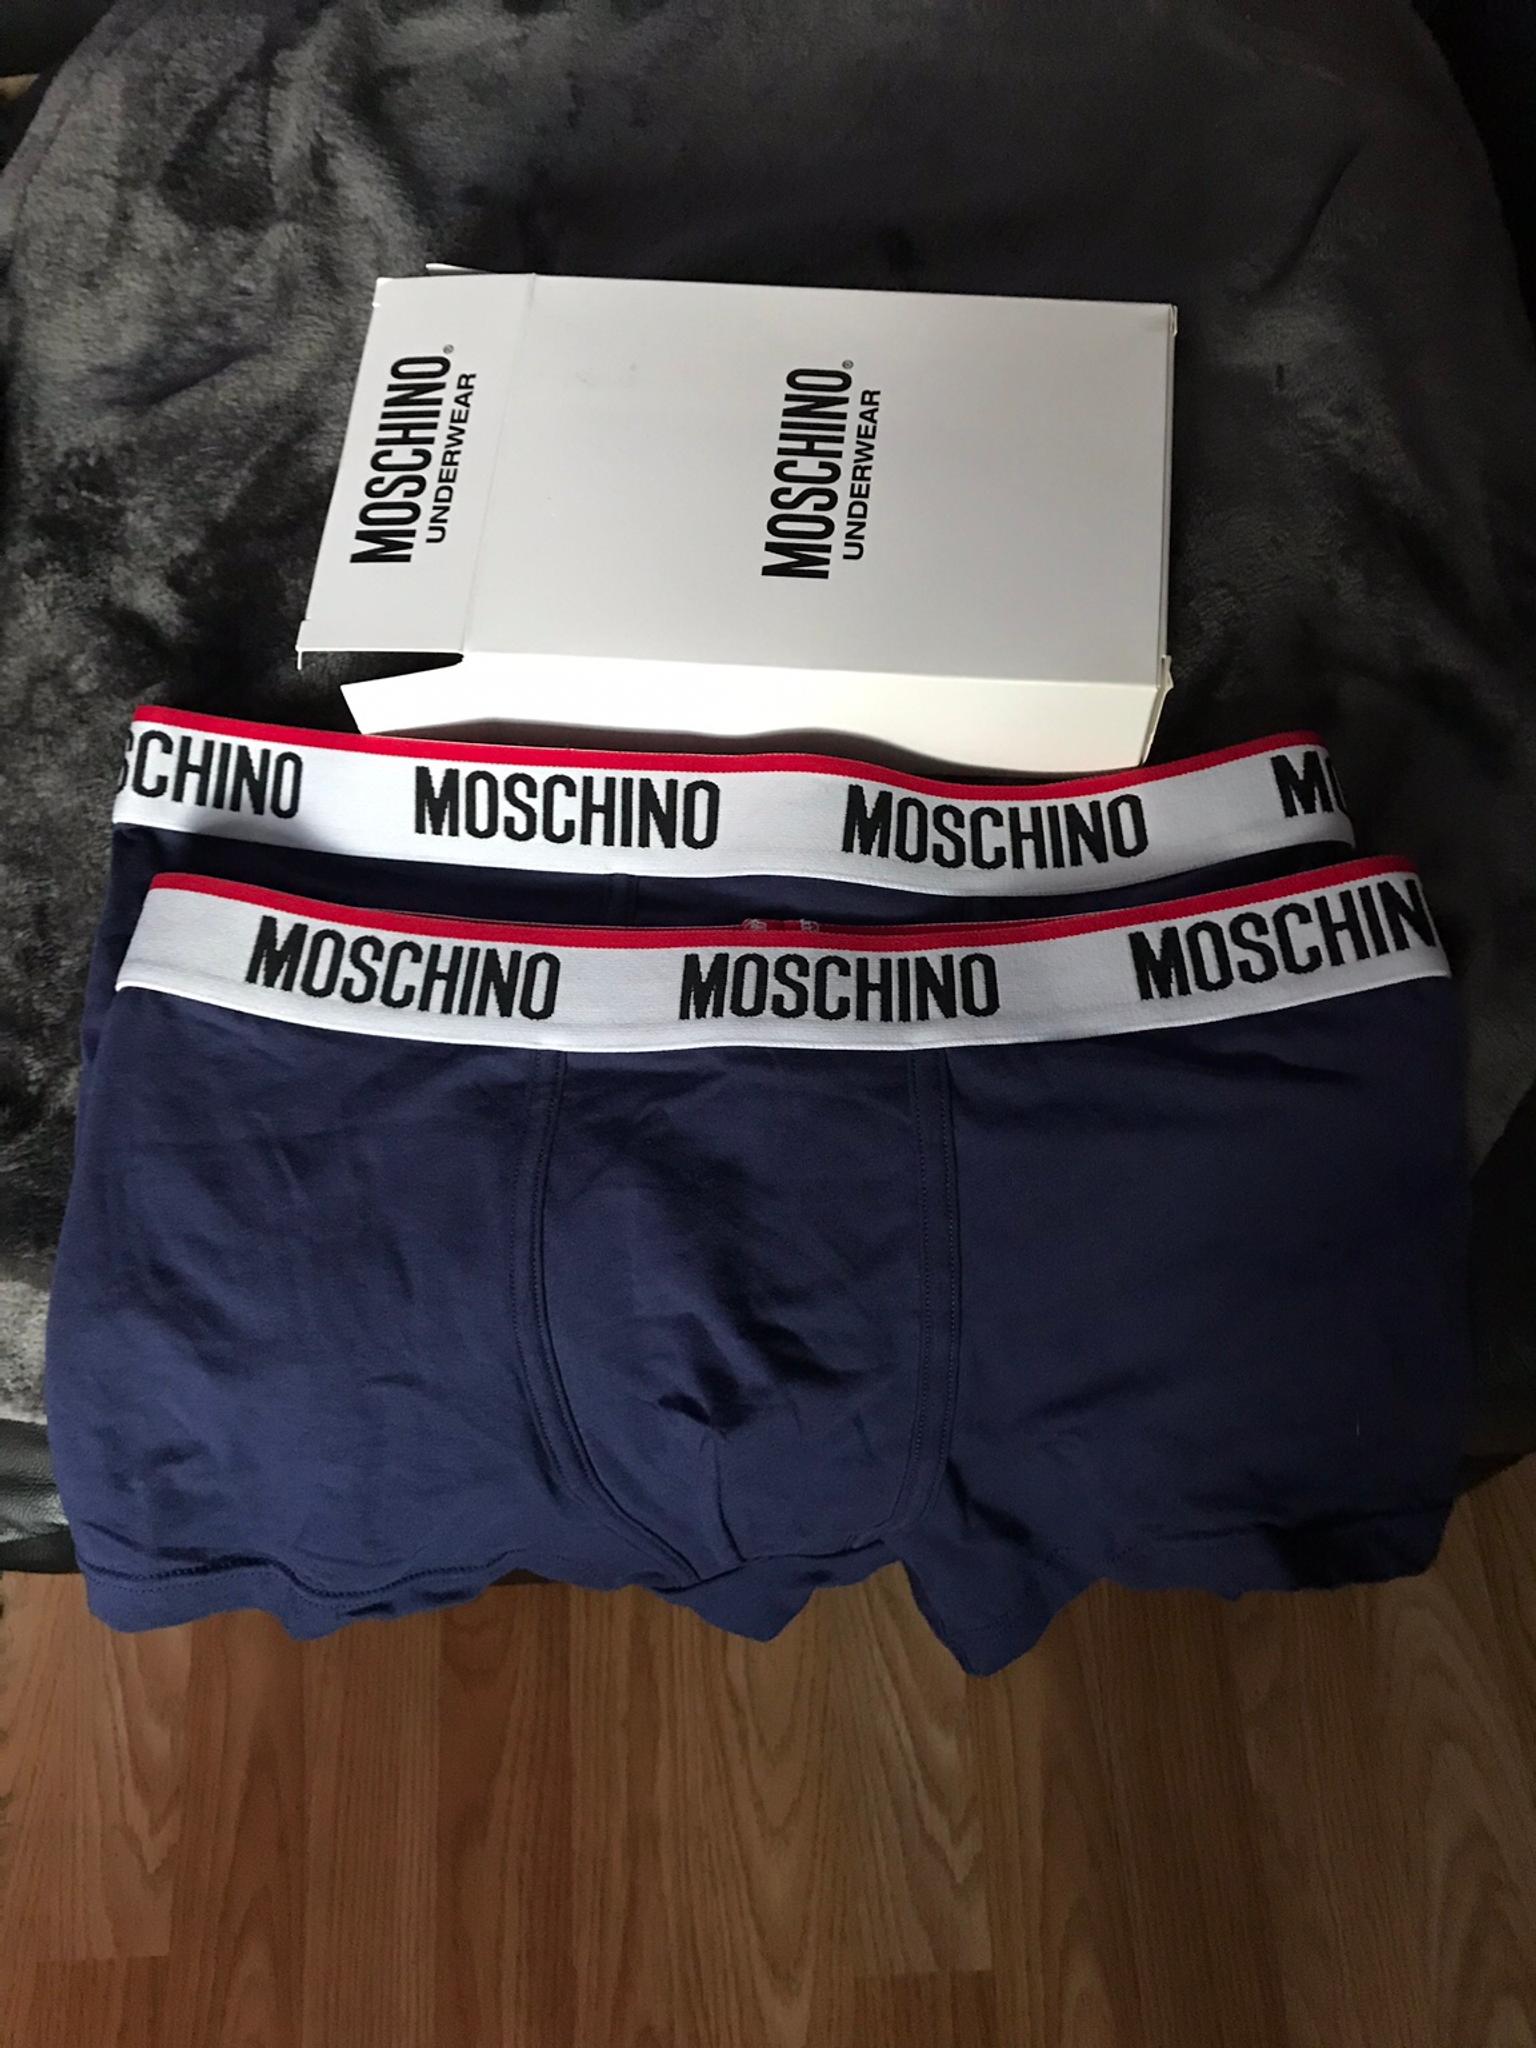 Moschino boxers in Wigan for £7.00 for 